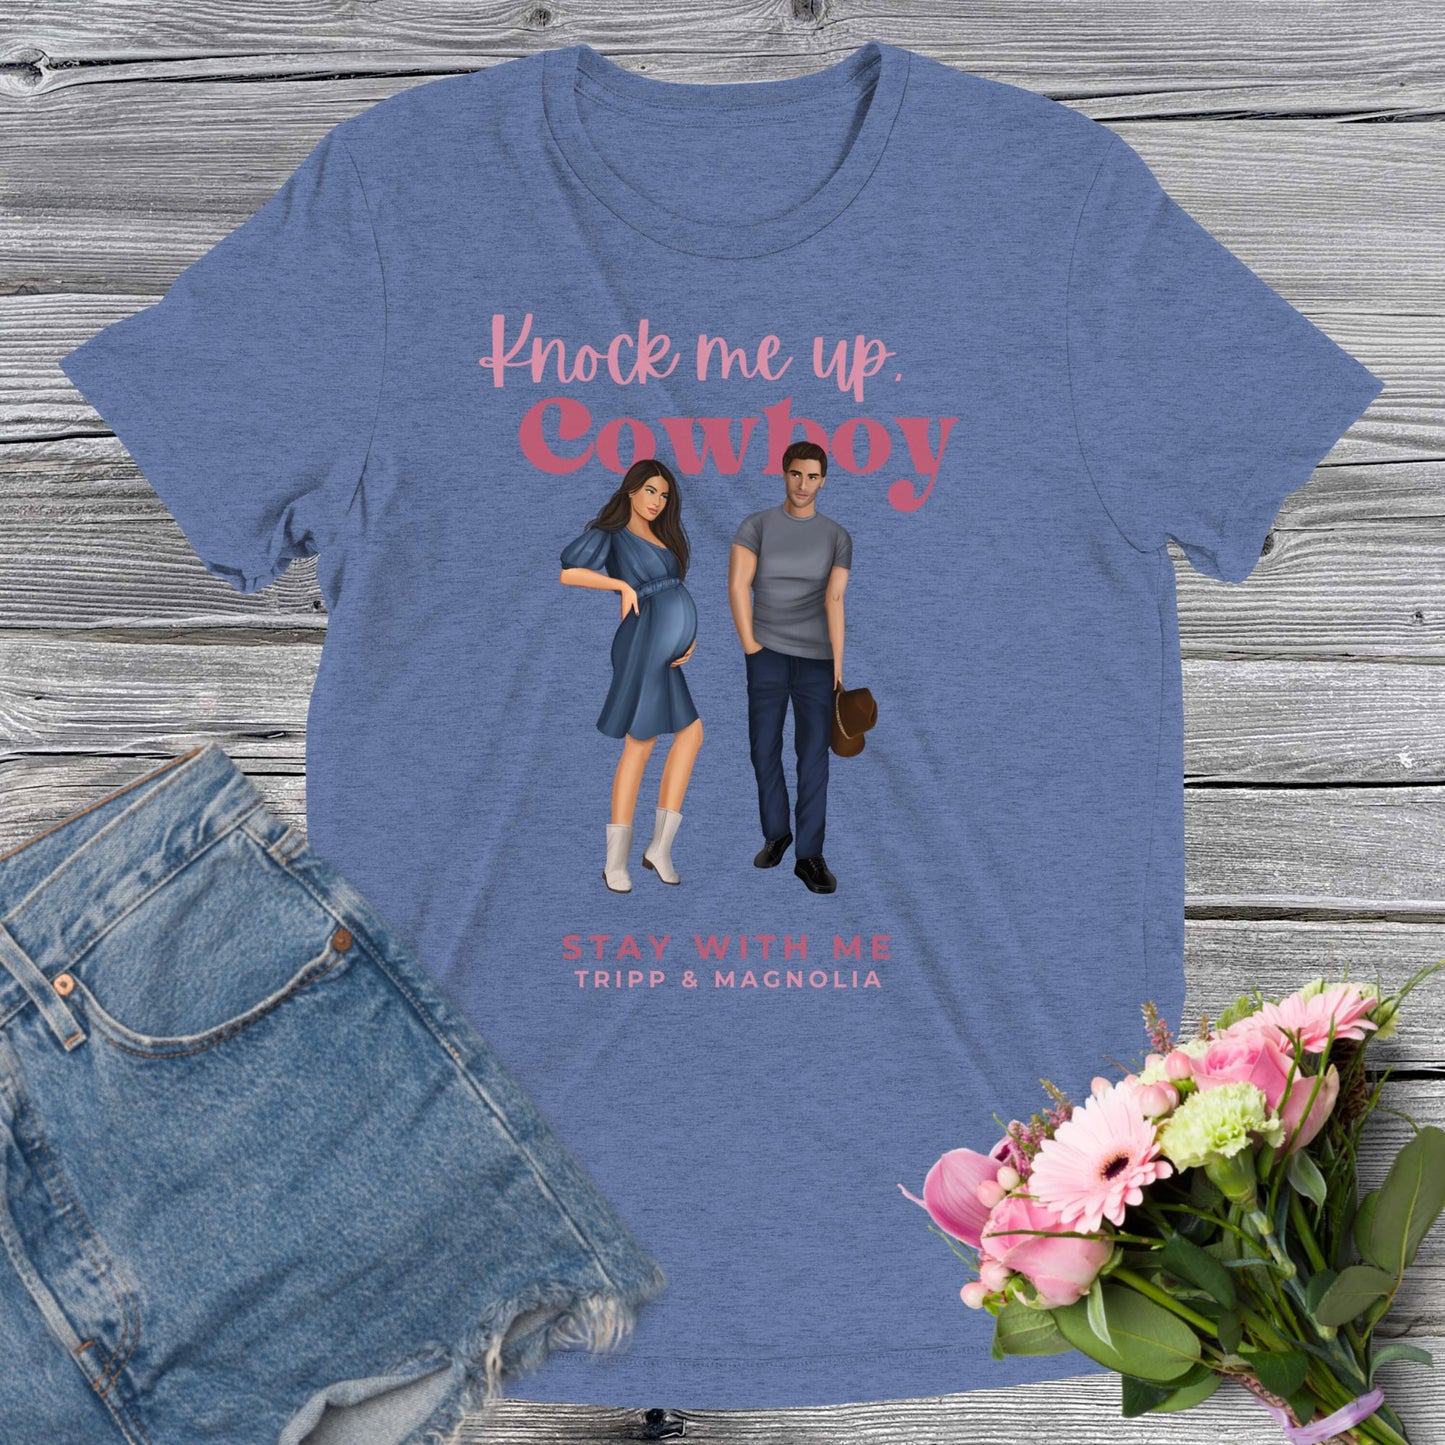 "Knock me up, Cowboy" [Stay With Me] Unisex Triblend Short Sleeve T-shirt